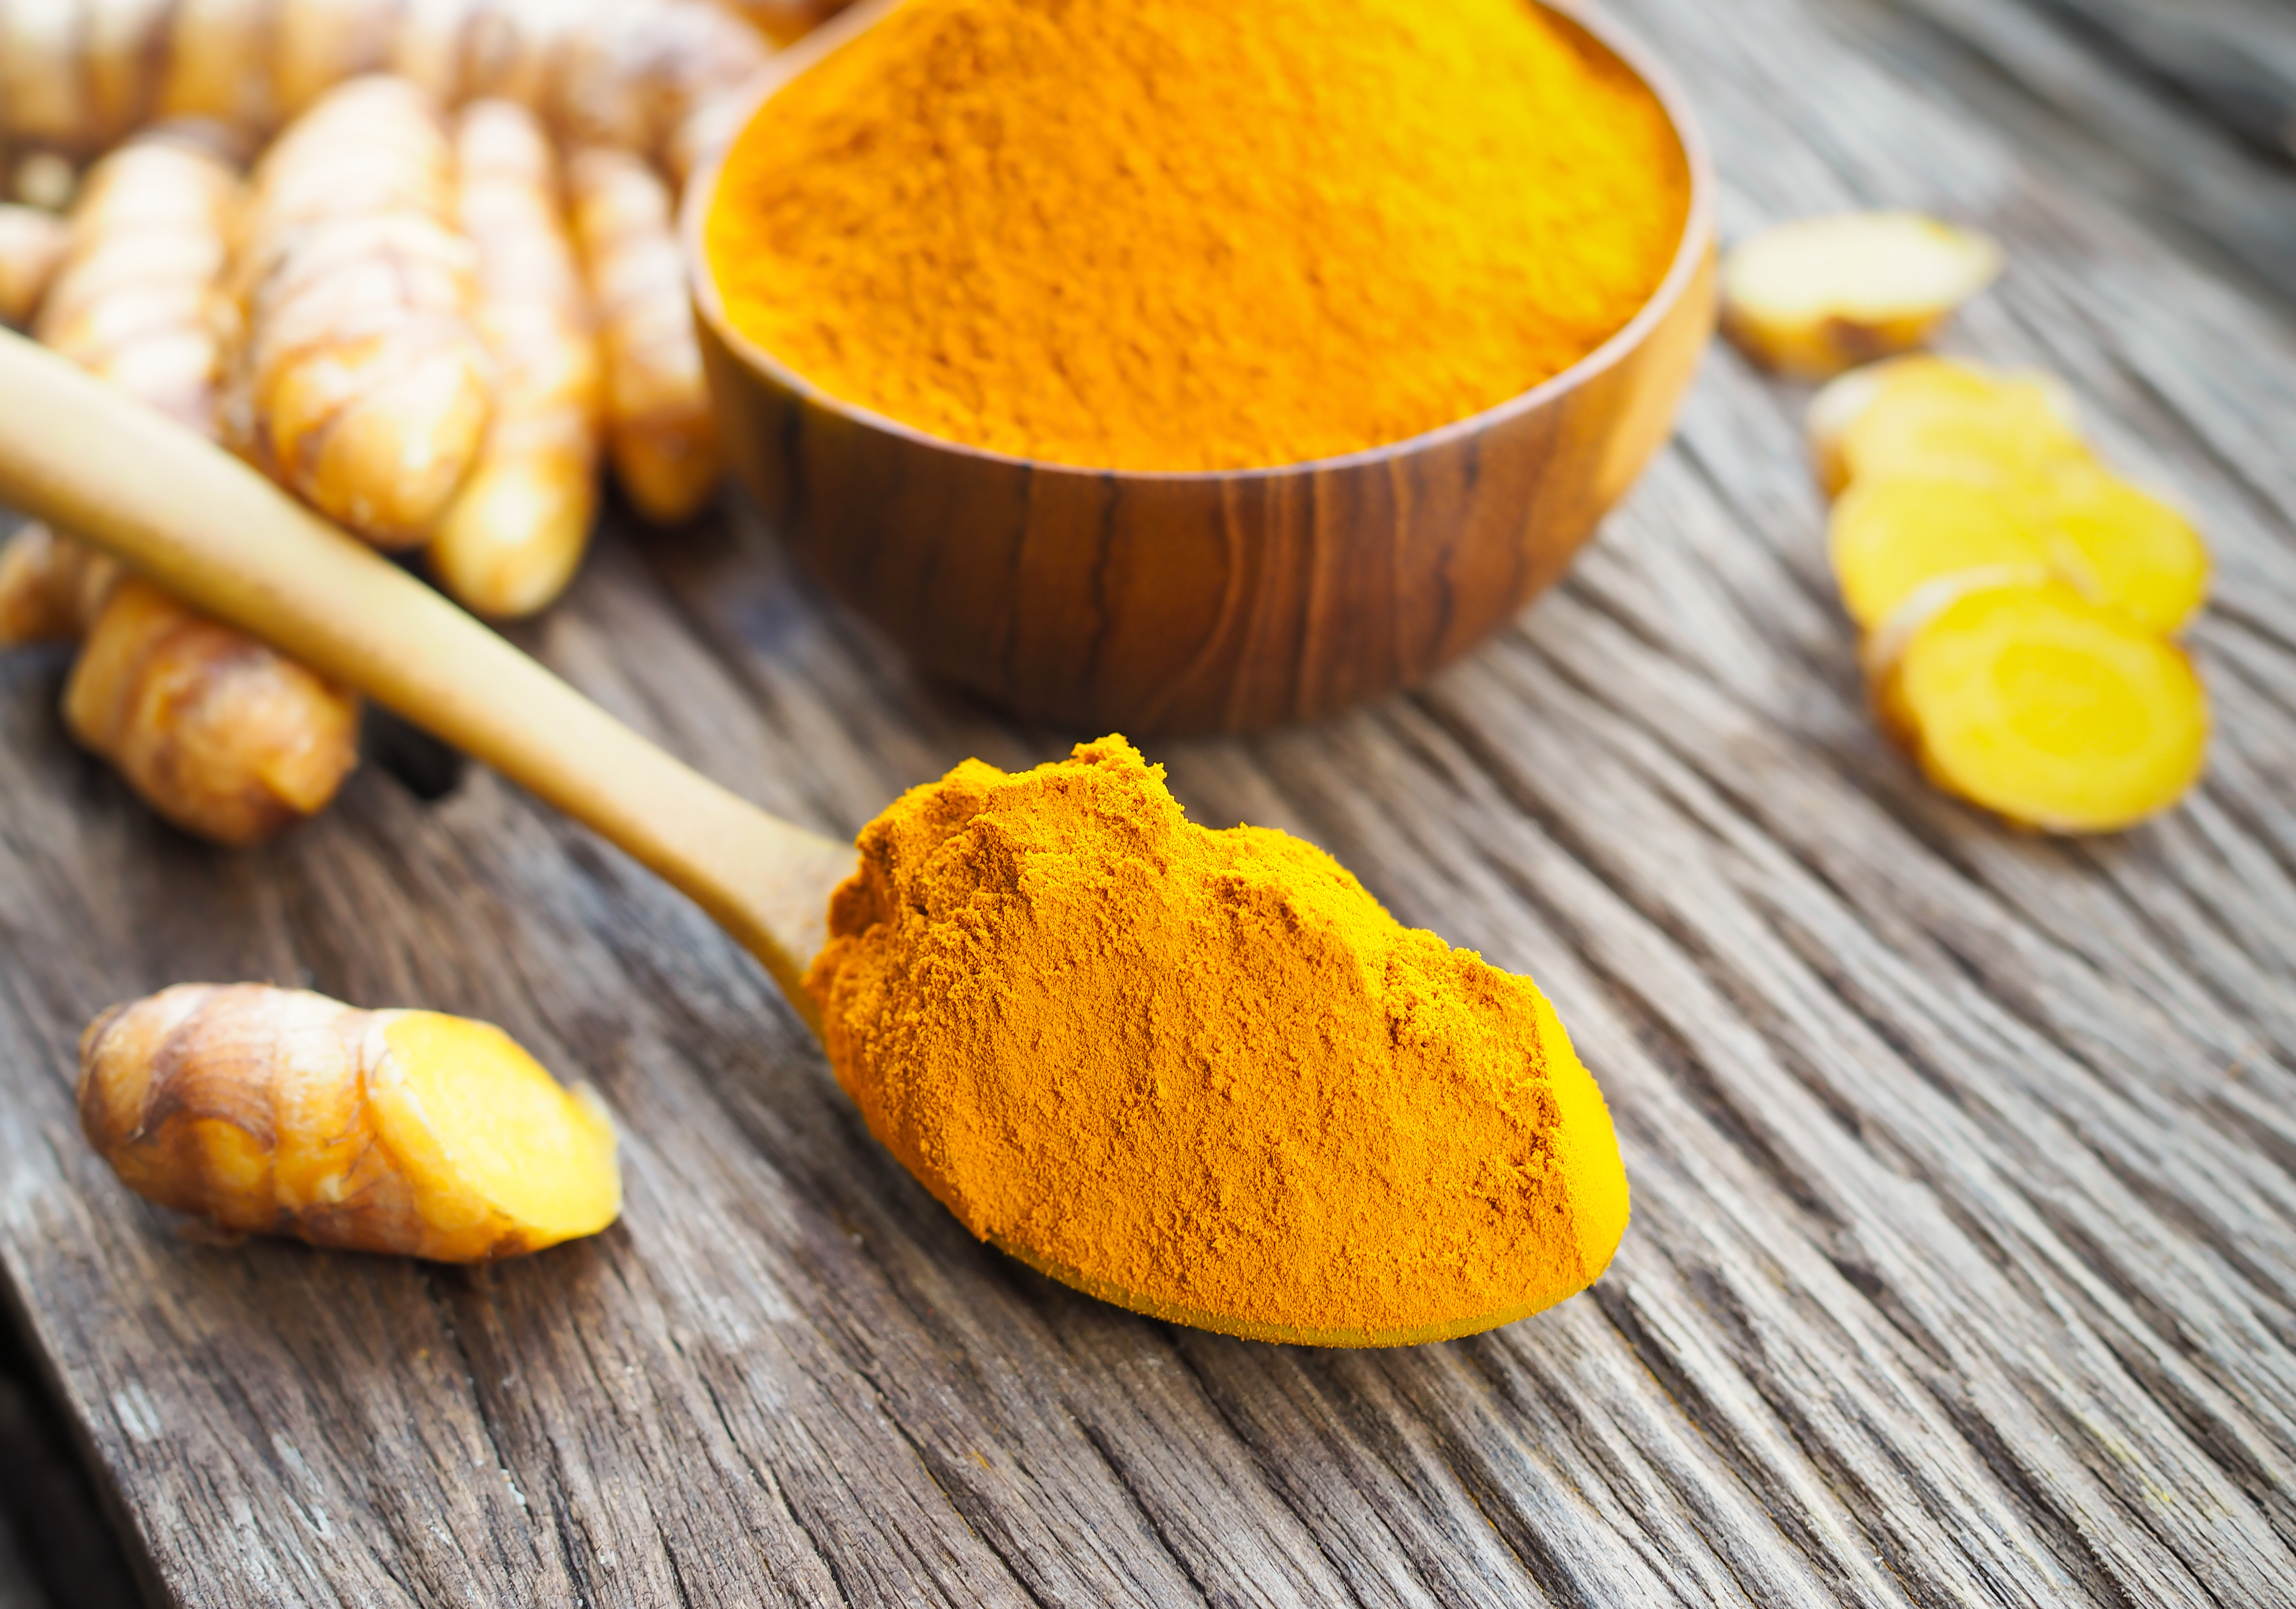 Mayo Clinic Q and A: Turmeric for healthier diet, pain relief - Mayo Clinic  News Network